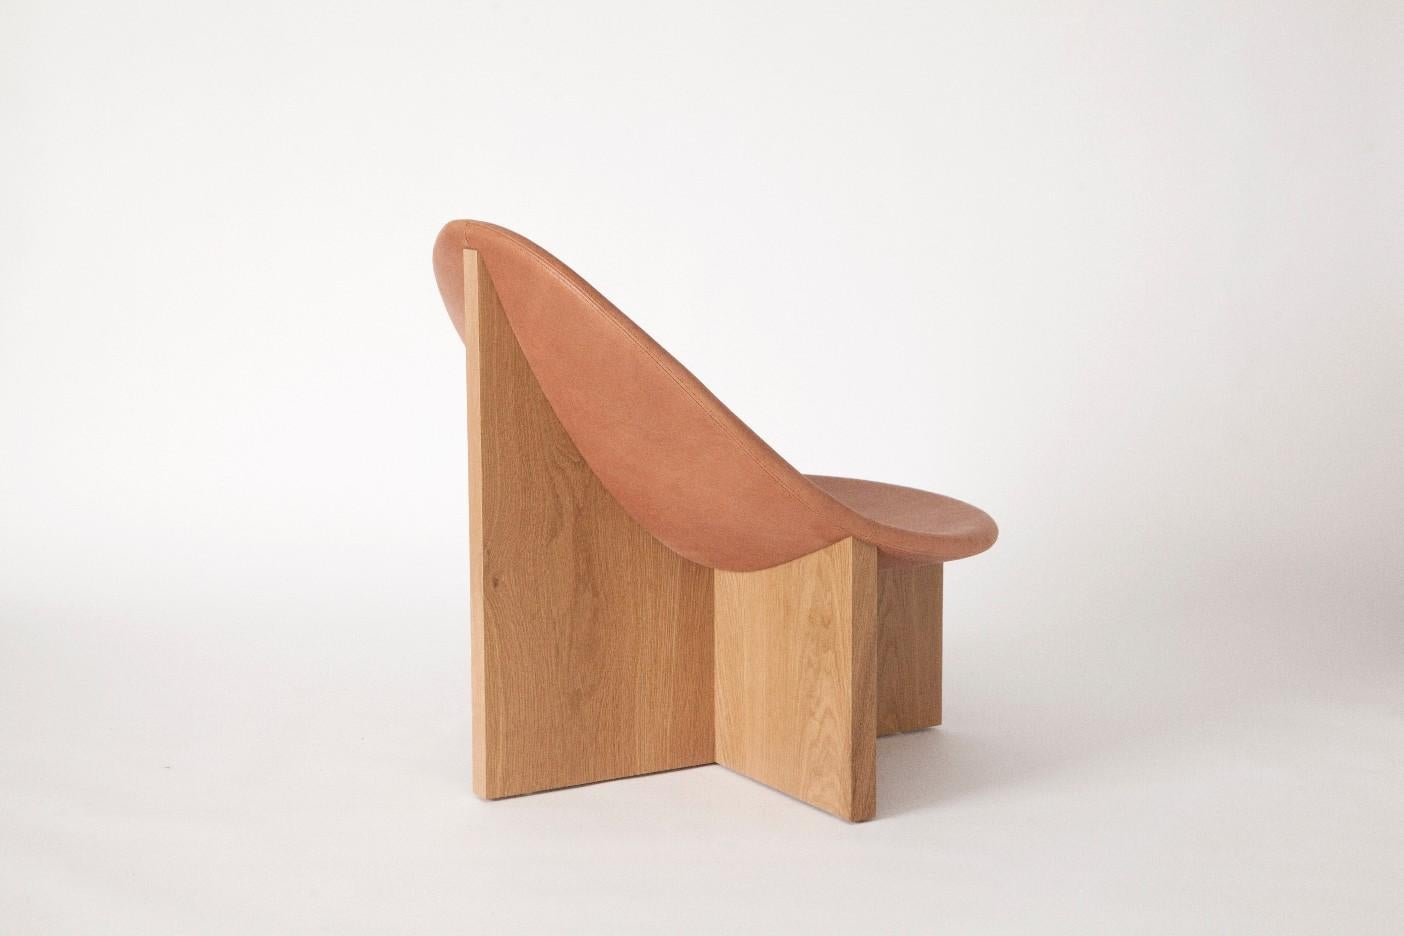 The Nido chair was the result of playing with the juxtaposition of shapes. The egg-like shape of the leather upholstered wood seat nesting in the cross shaped solid wood frame, gives it the name Nido, meaning nest in Spanish. The Nido's strong lines